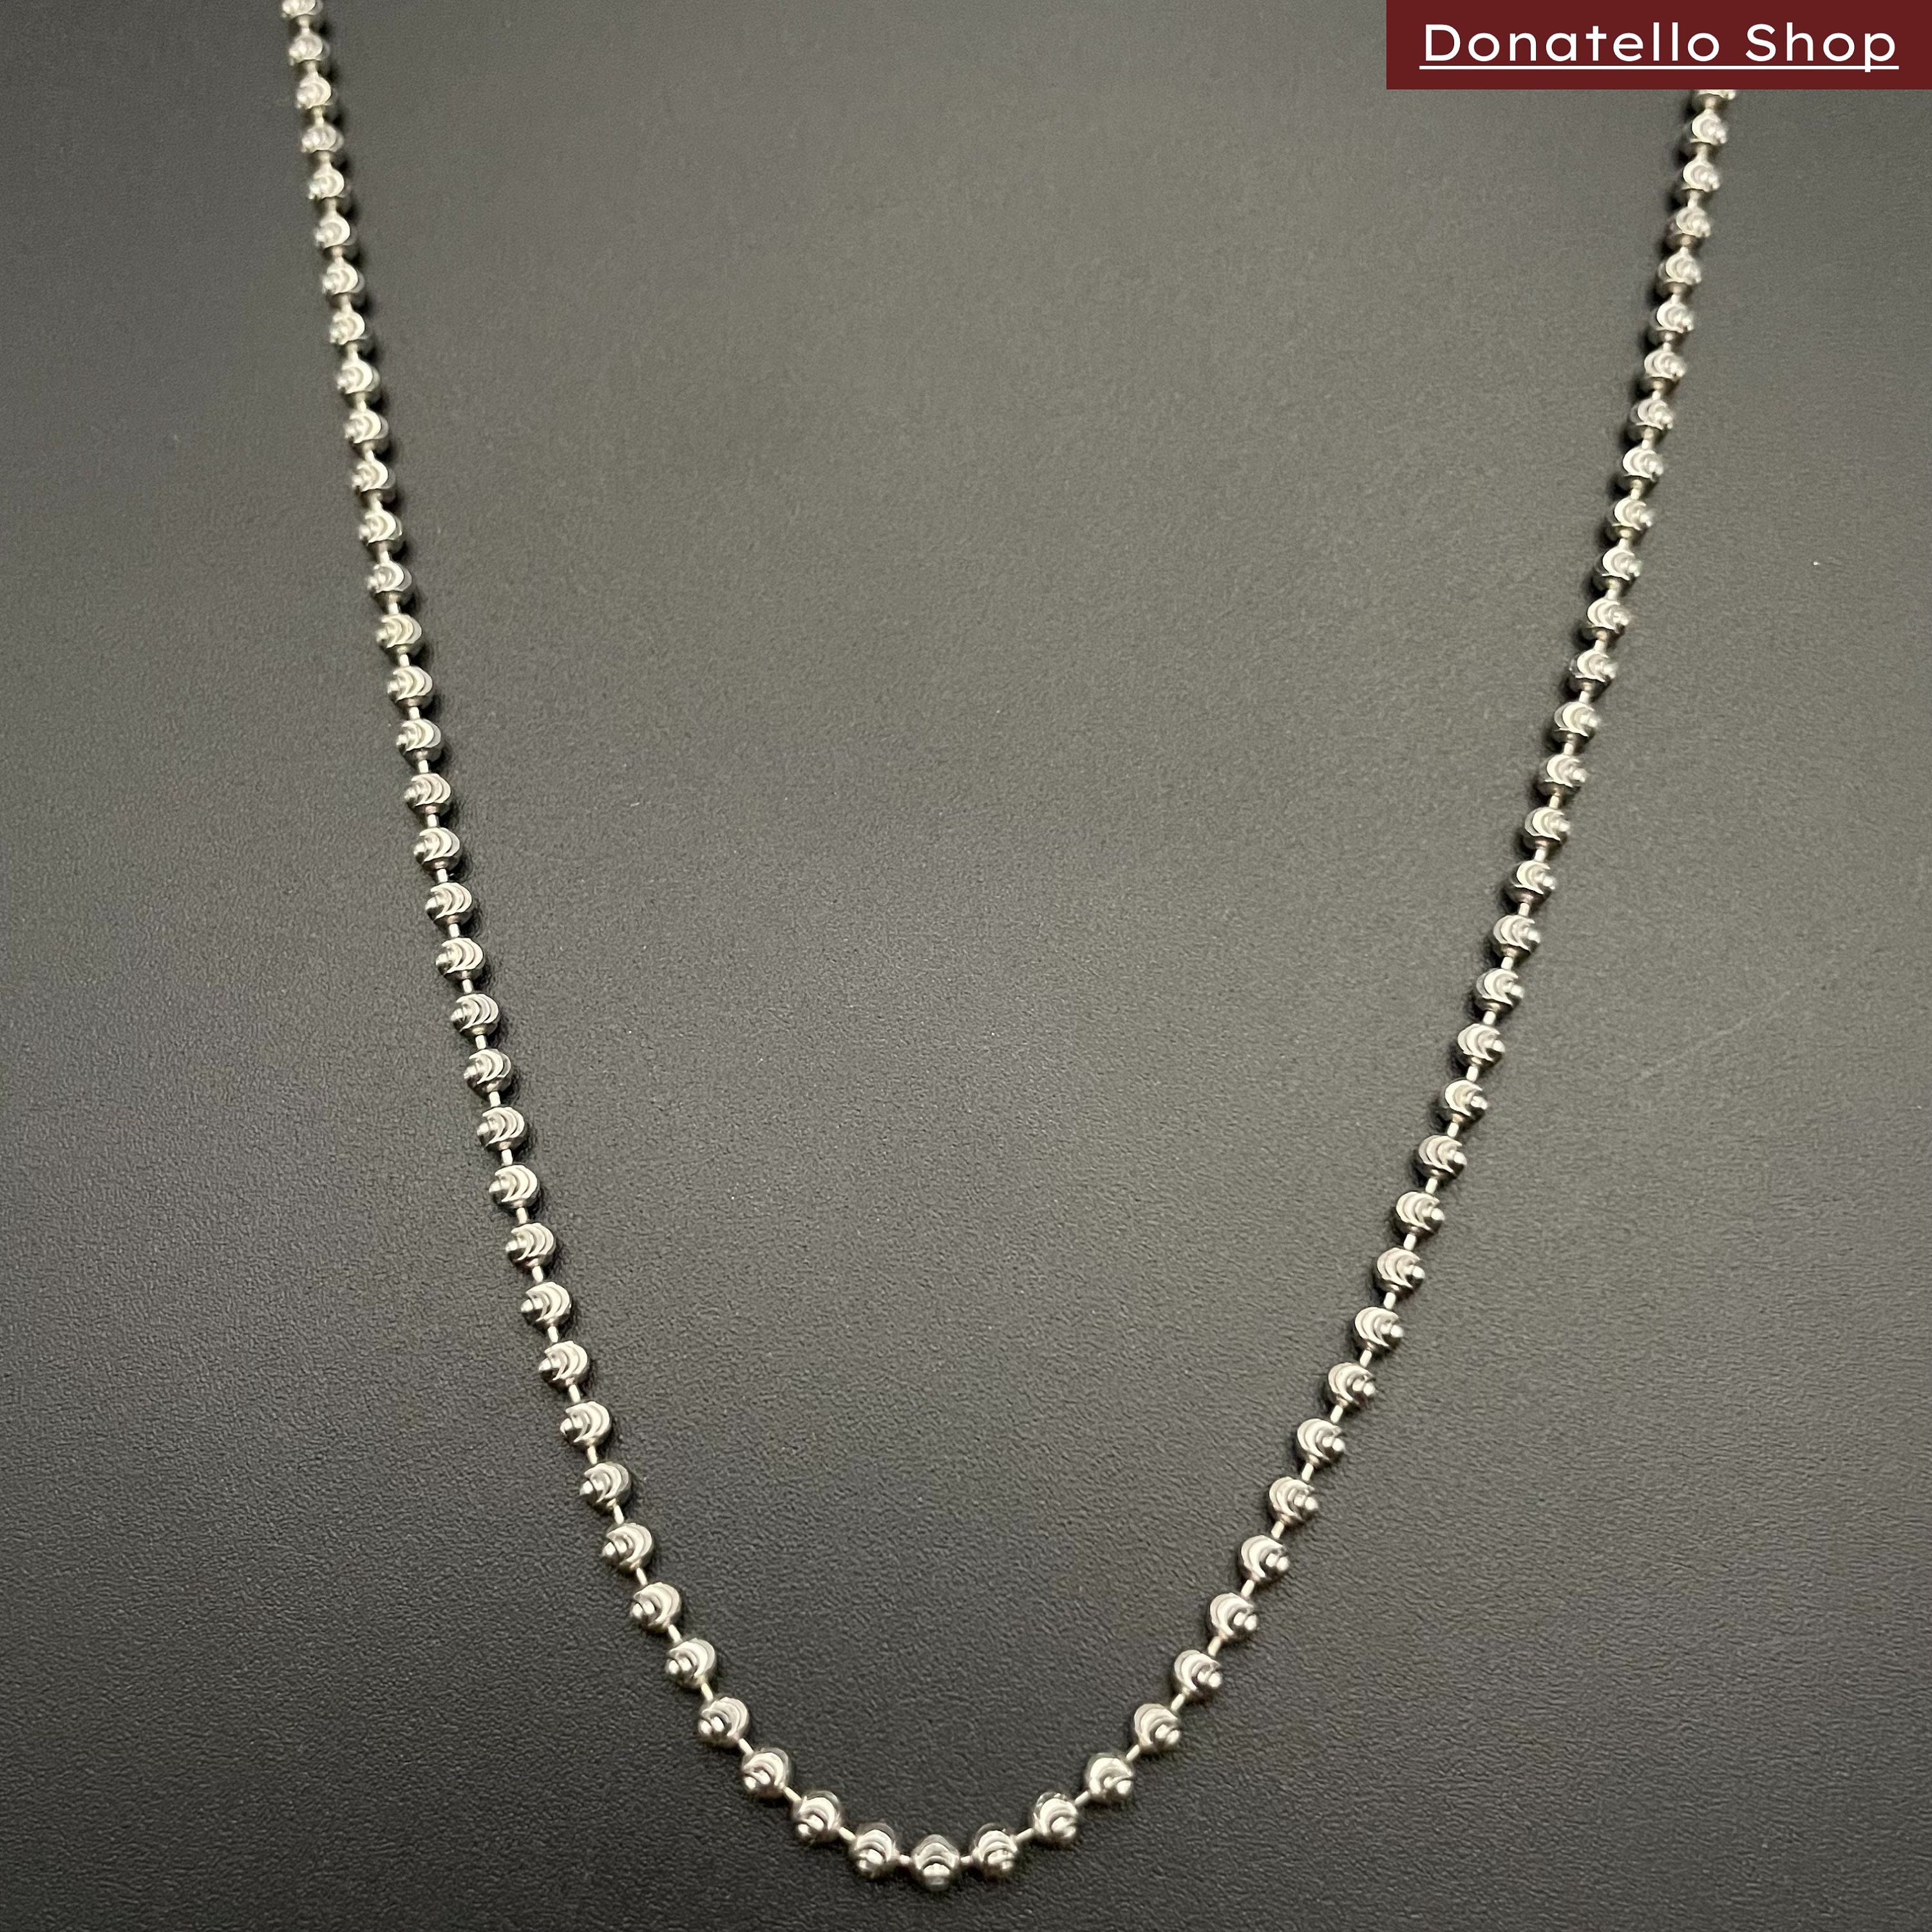 Solid 925 Sterling Silver Ball Bead Chain Necklace, Chains for Men, Women's  Necklace for Charms, Mens Women Chain Necklace 